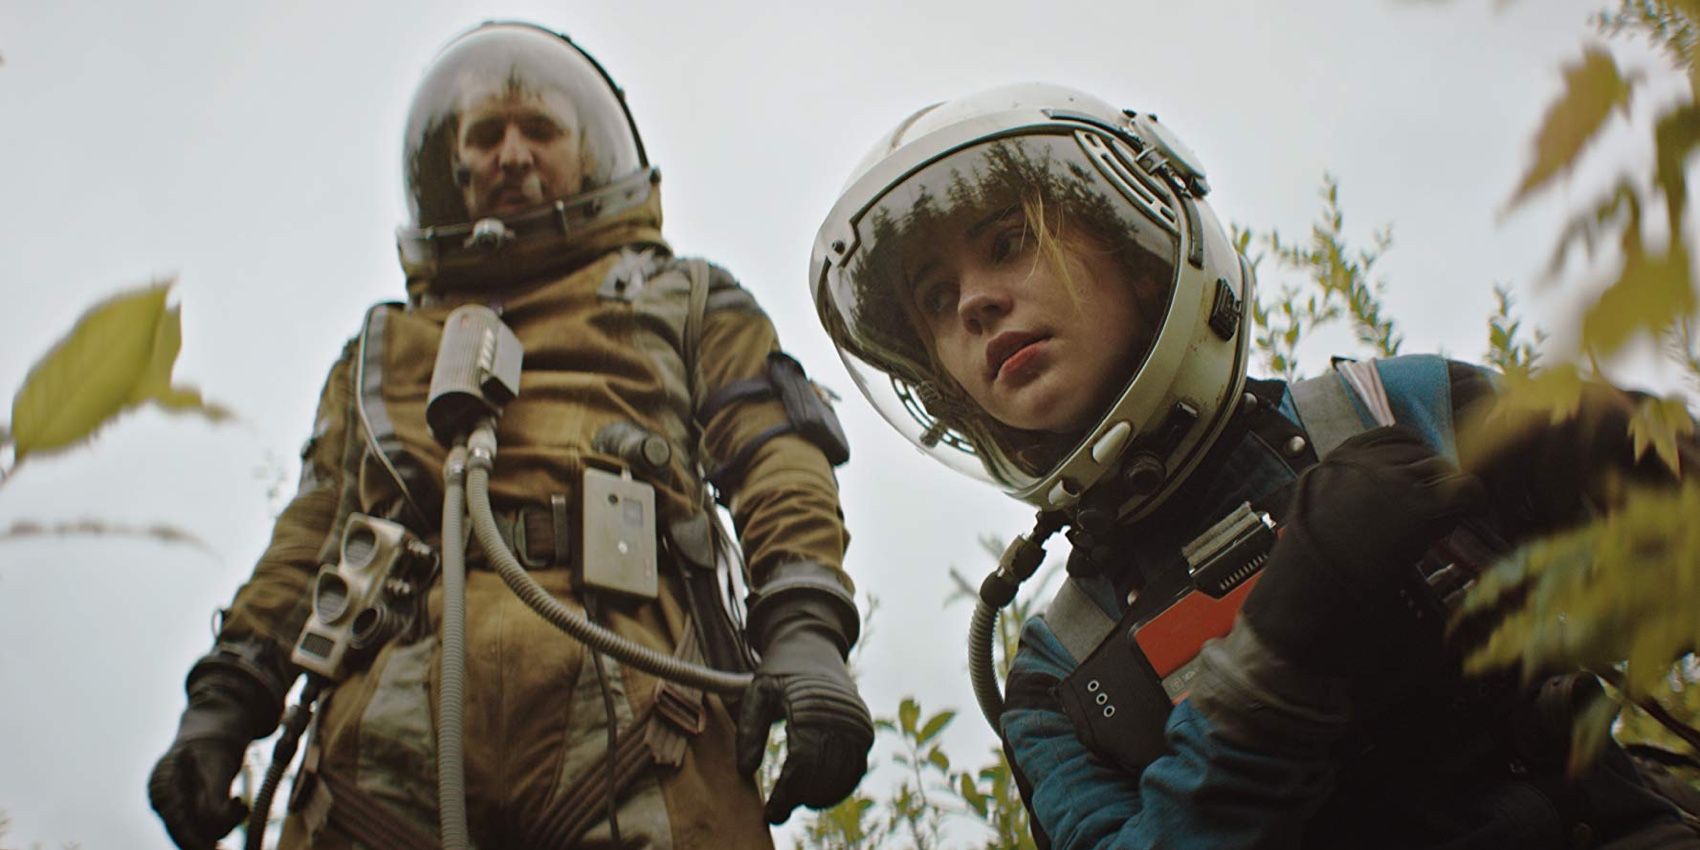 10 Underrated SciFi Films From The 2010s You Have To See